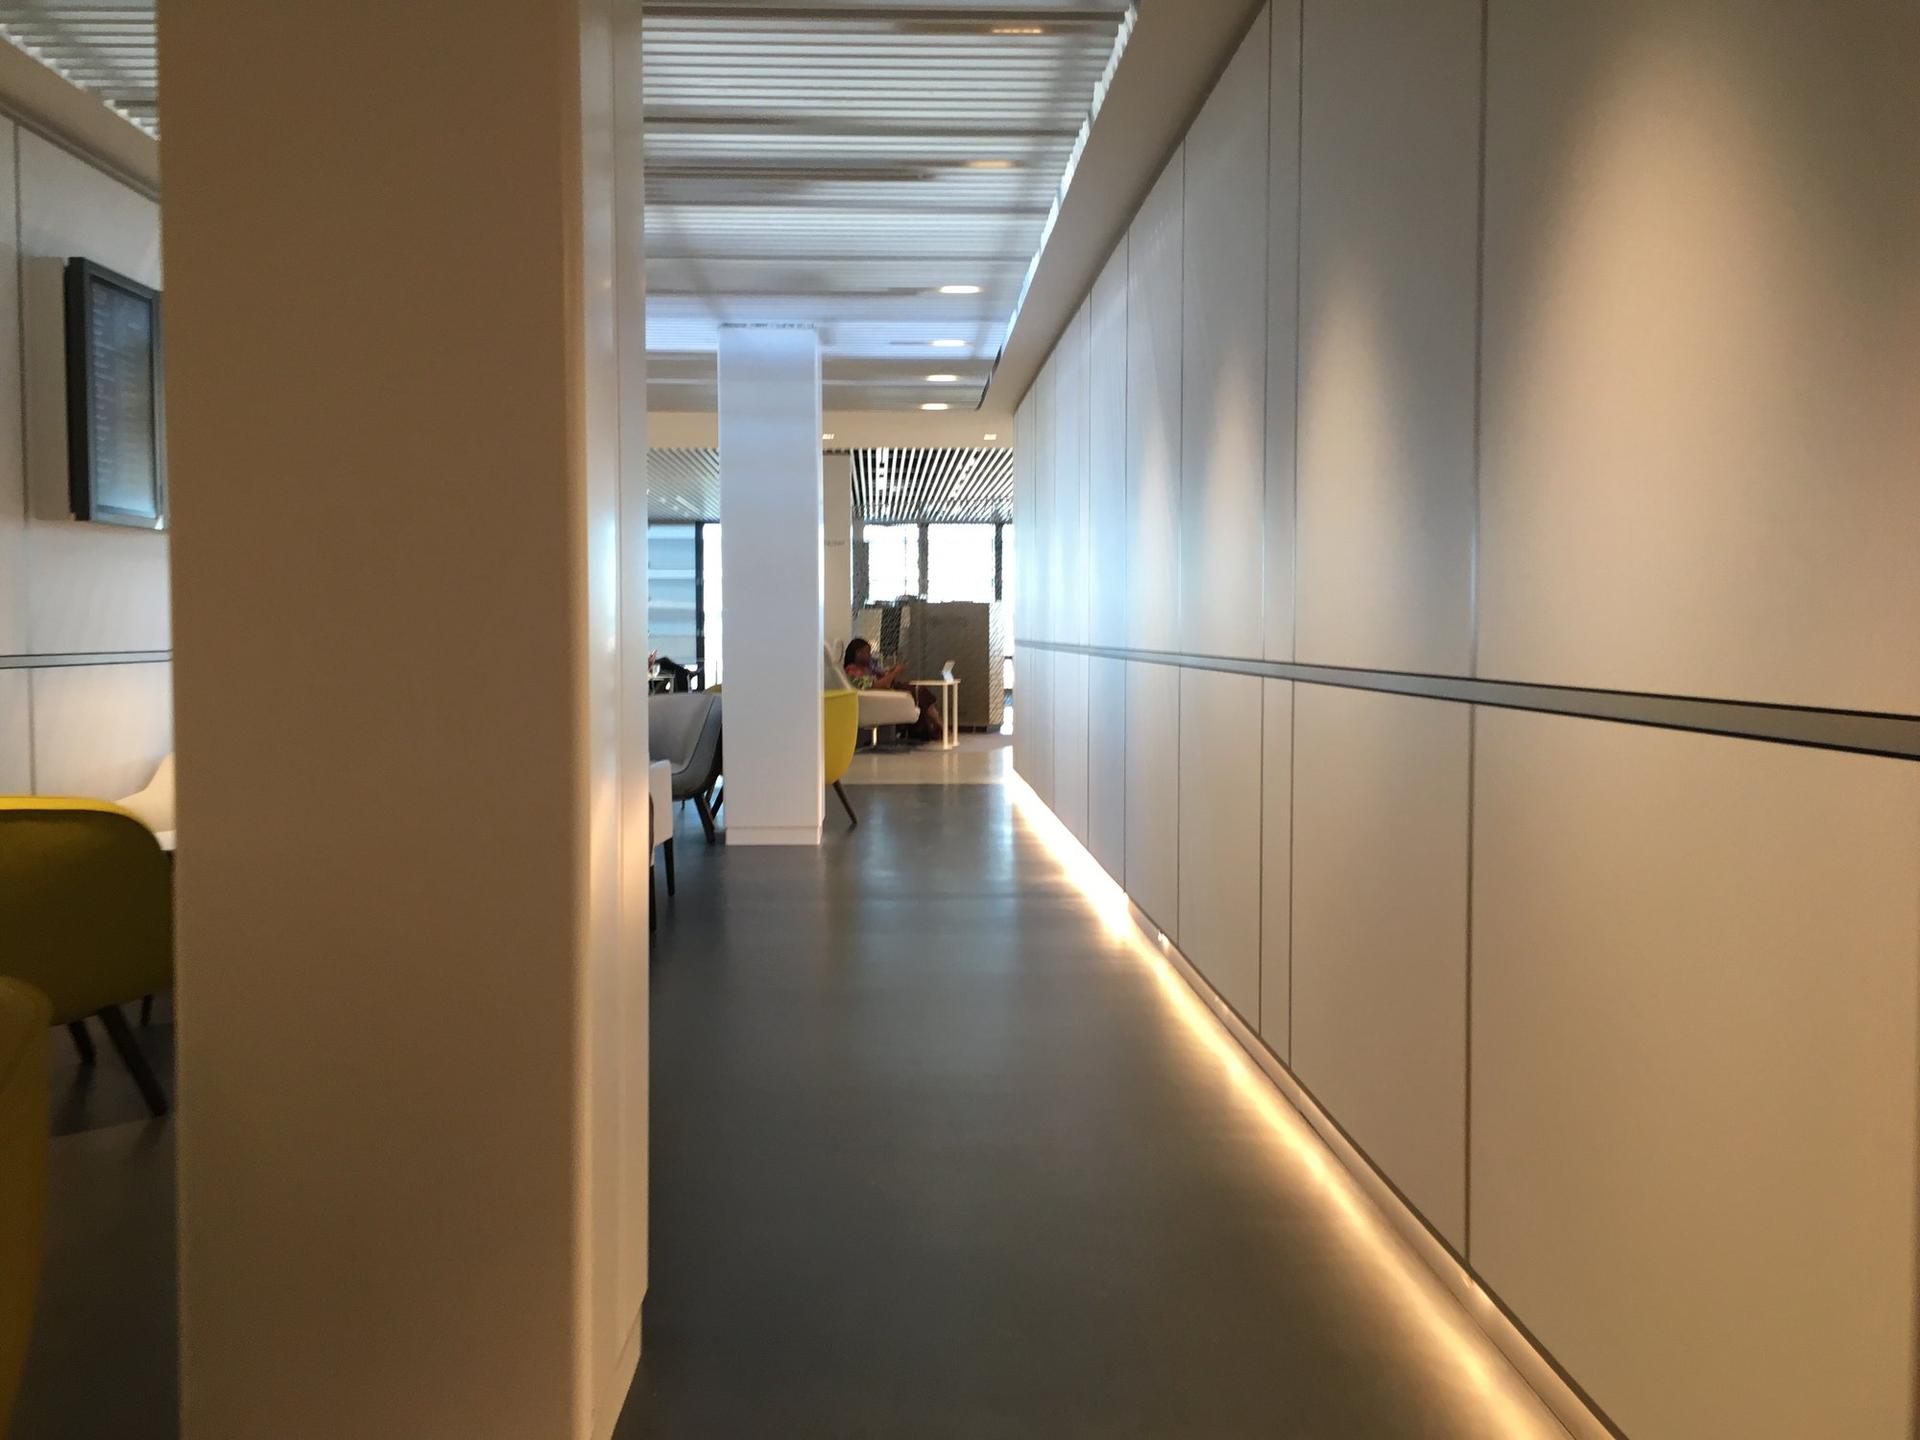 Air France Lounge (Concourse L) image 40 of 57